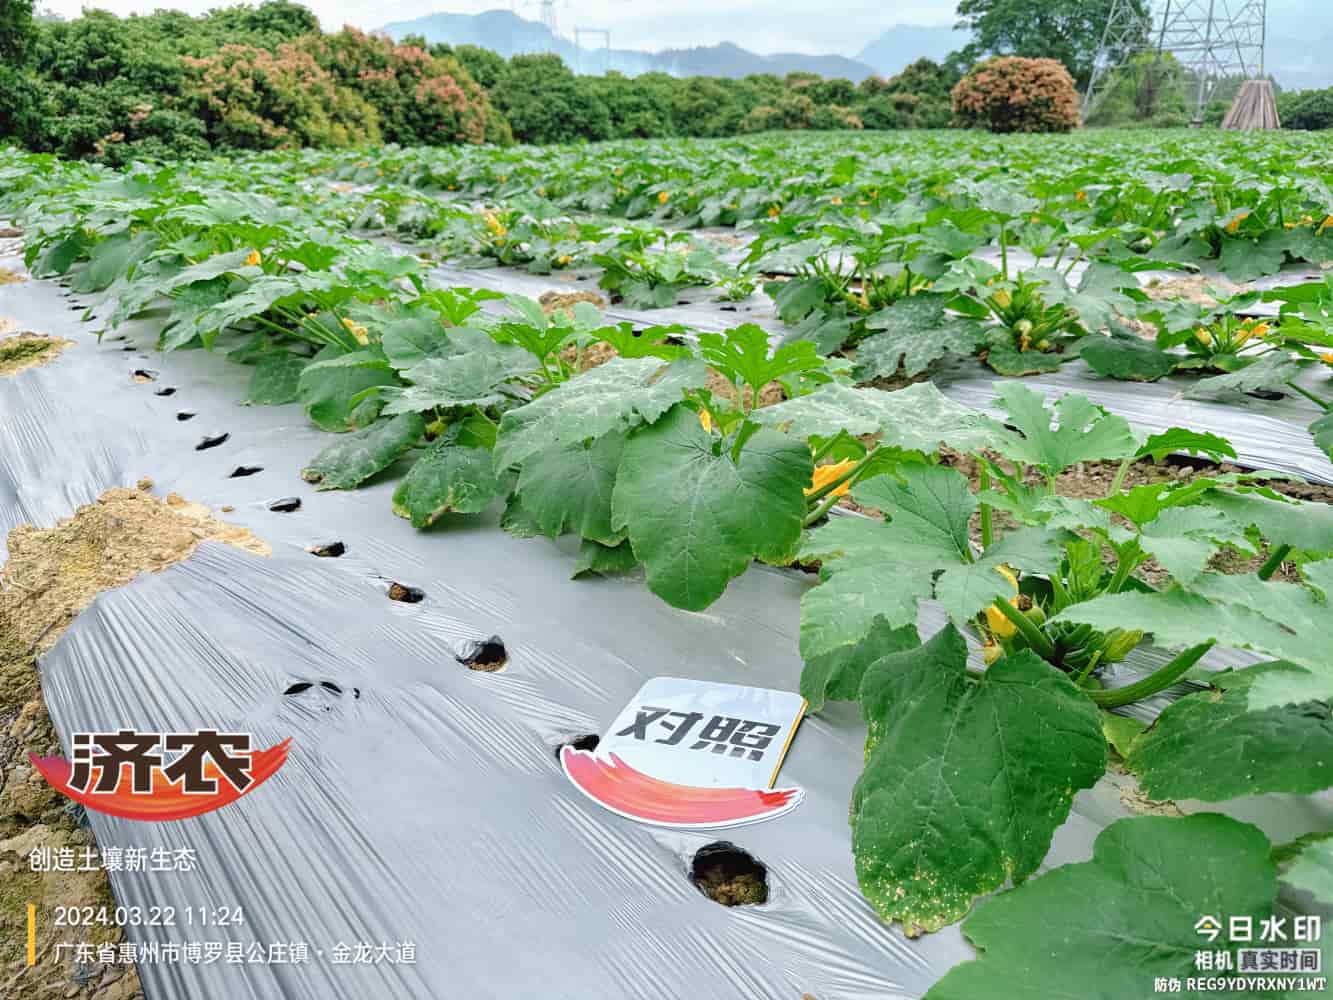 The effect of using agricultural products in Guangdong zucchini(图2)